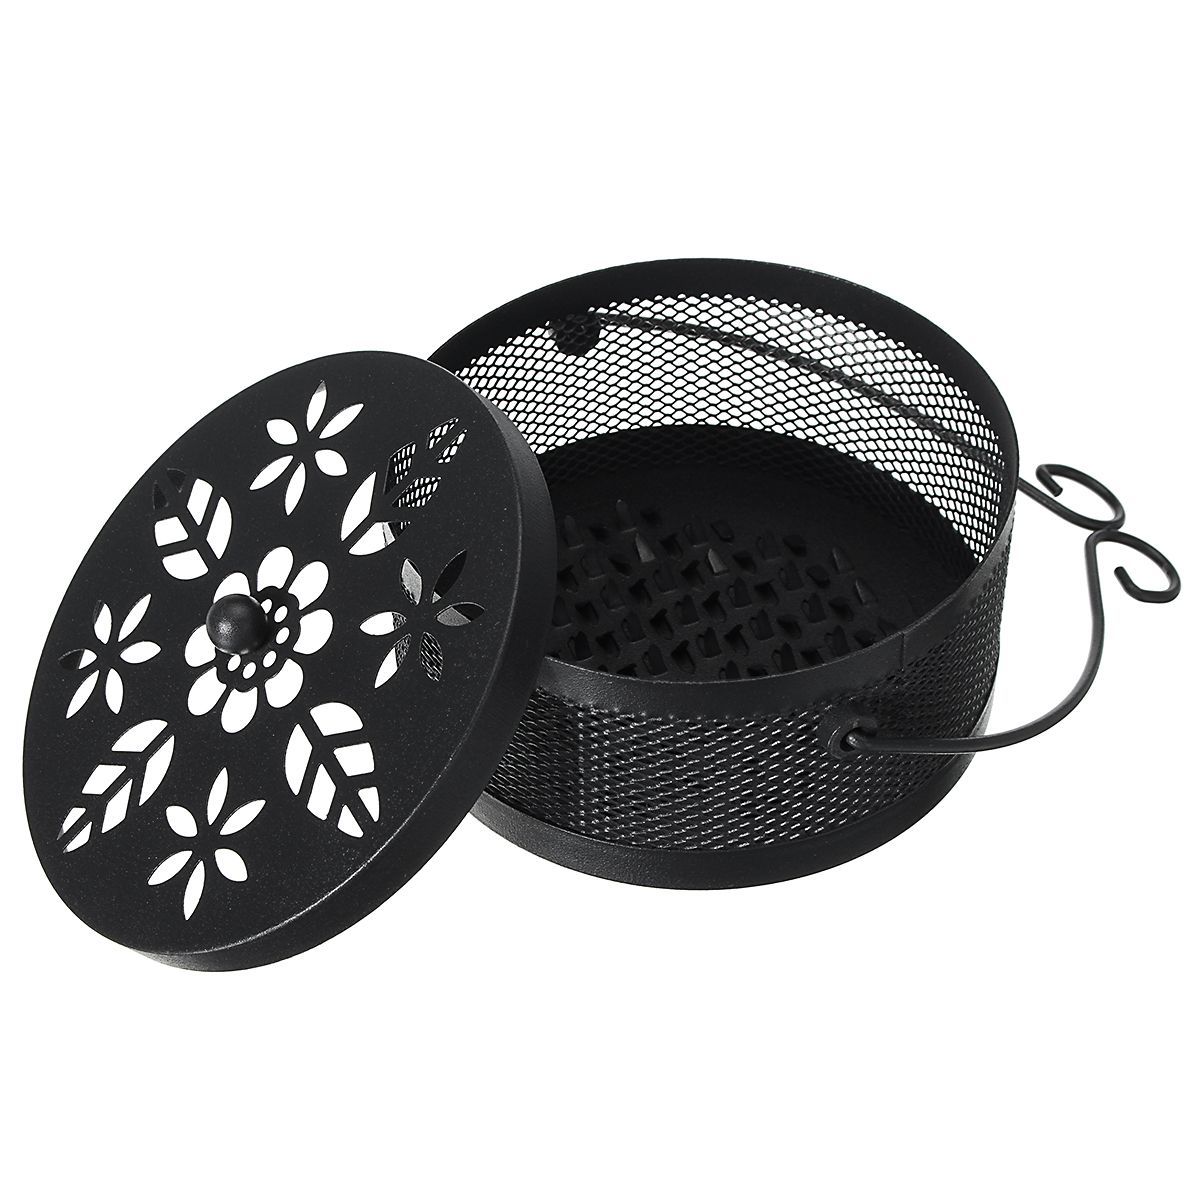 Hollow-Iron-Mosquito-Incense-Box-Sandalwood-Furnace-Repellent-Holder-Coil-Burner-1606266